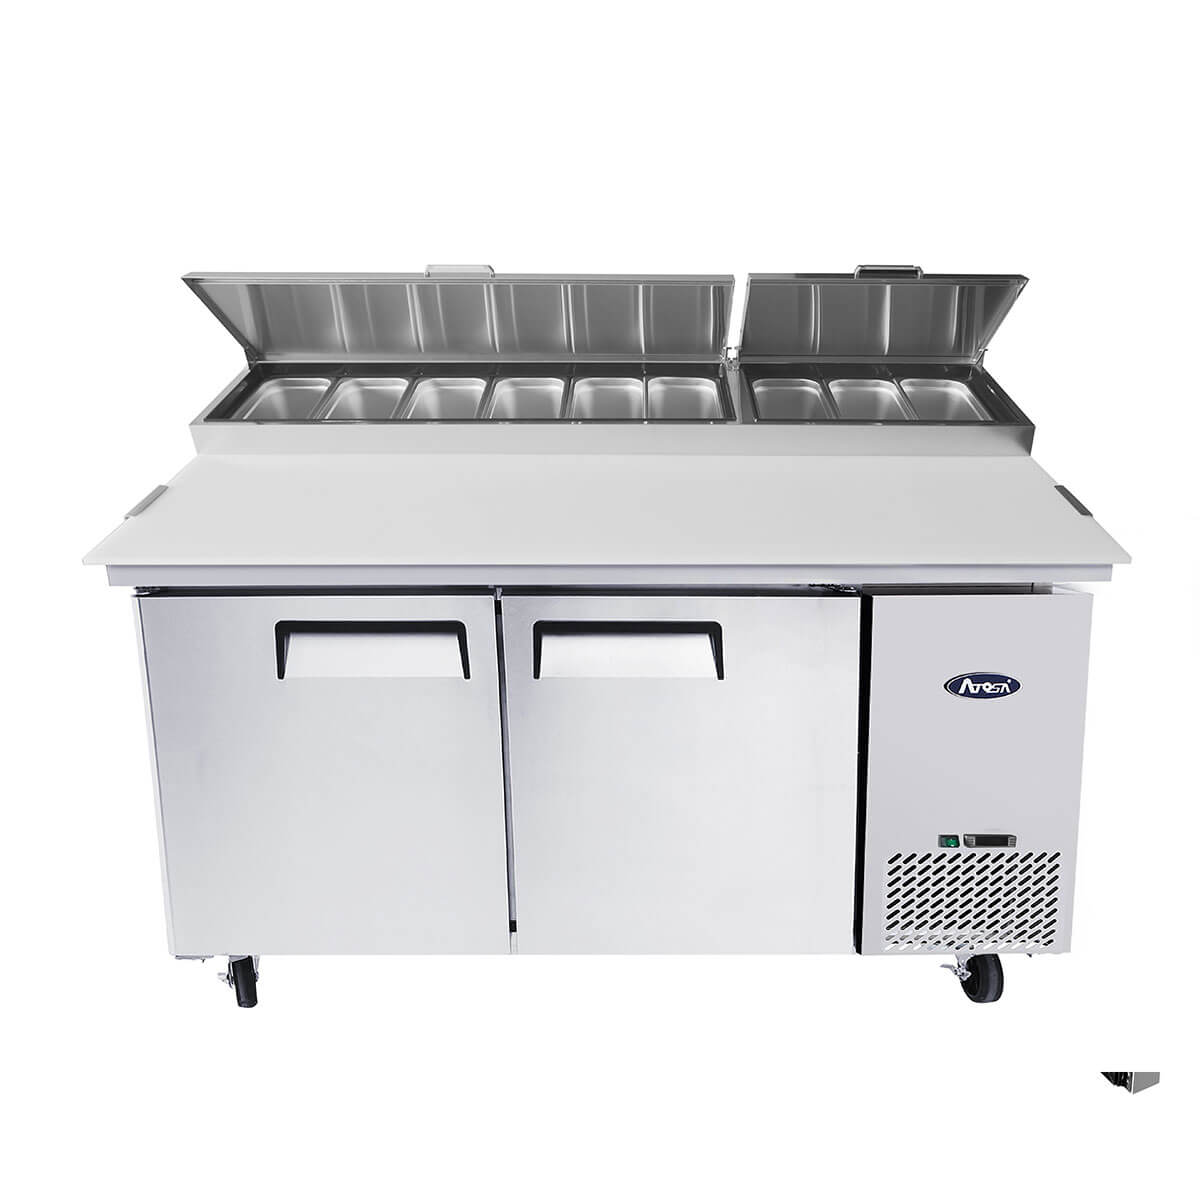 MPF8202GR 67″ Refrigerated Pizza Prep Table open top